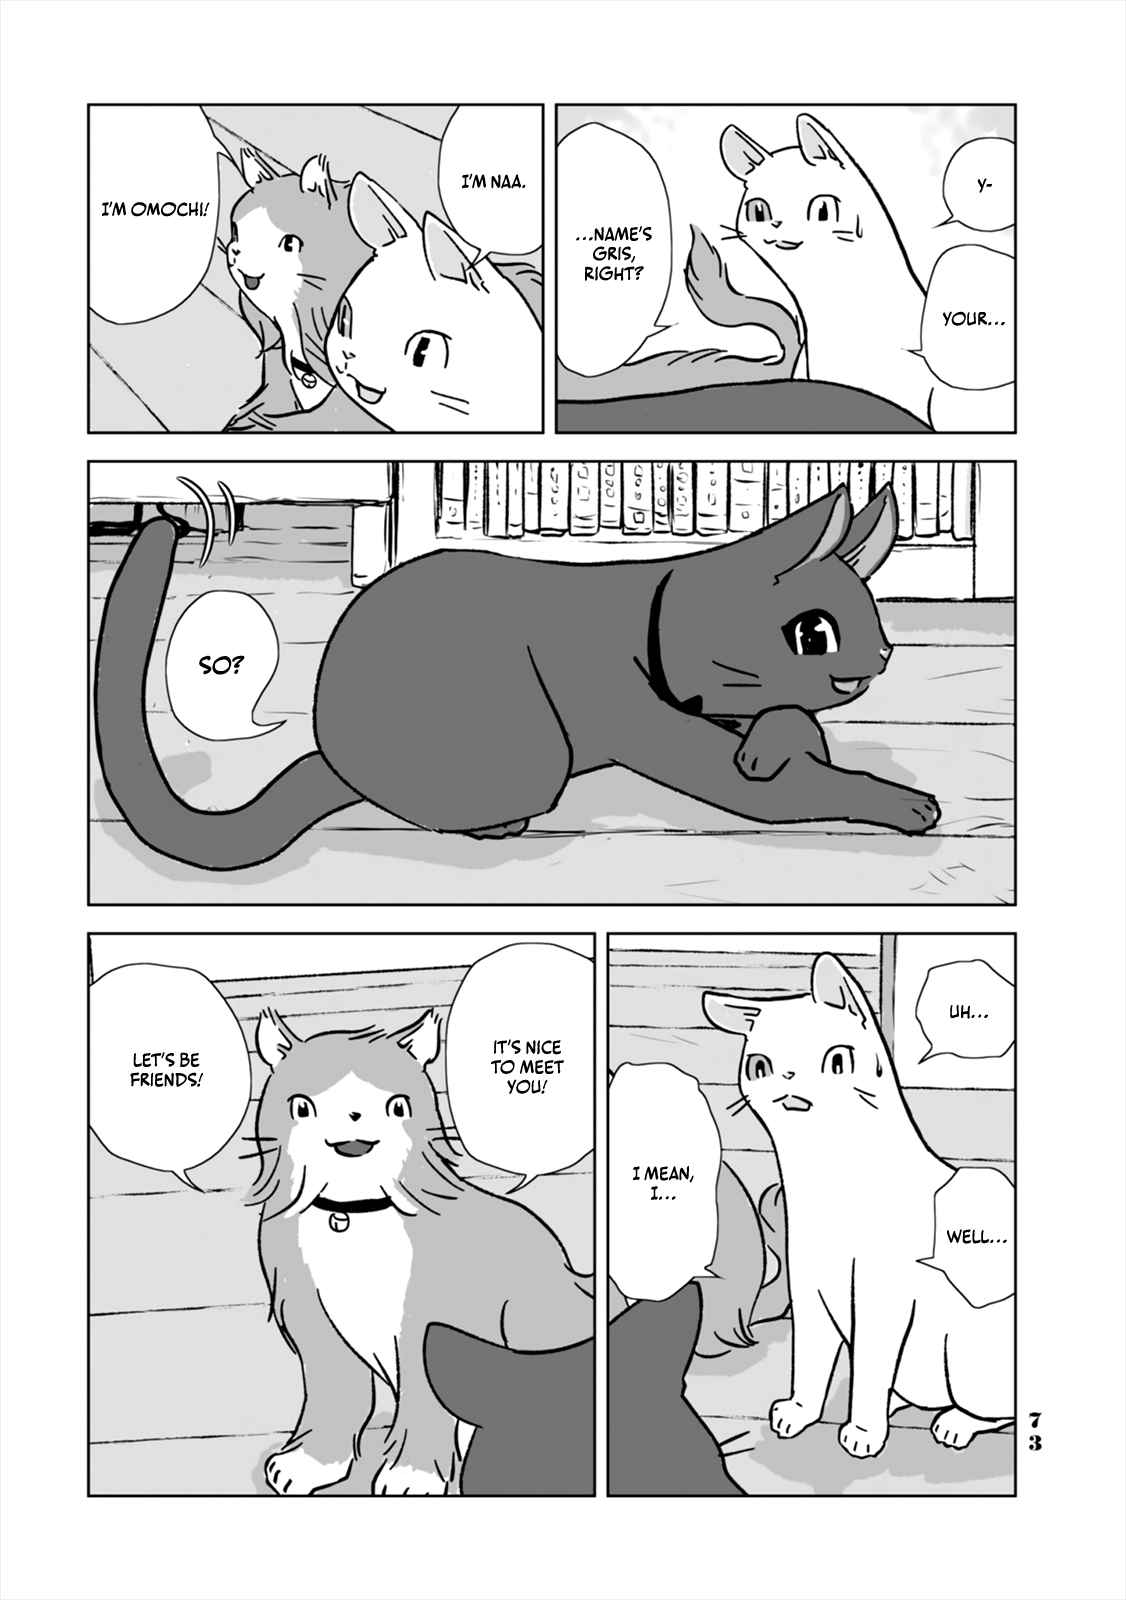 No cats were harmed in this comic 4